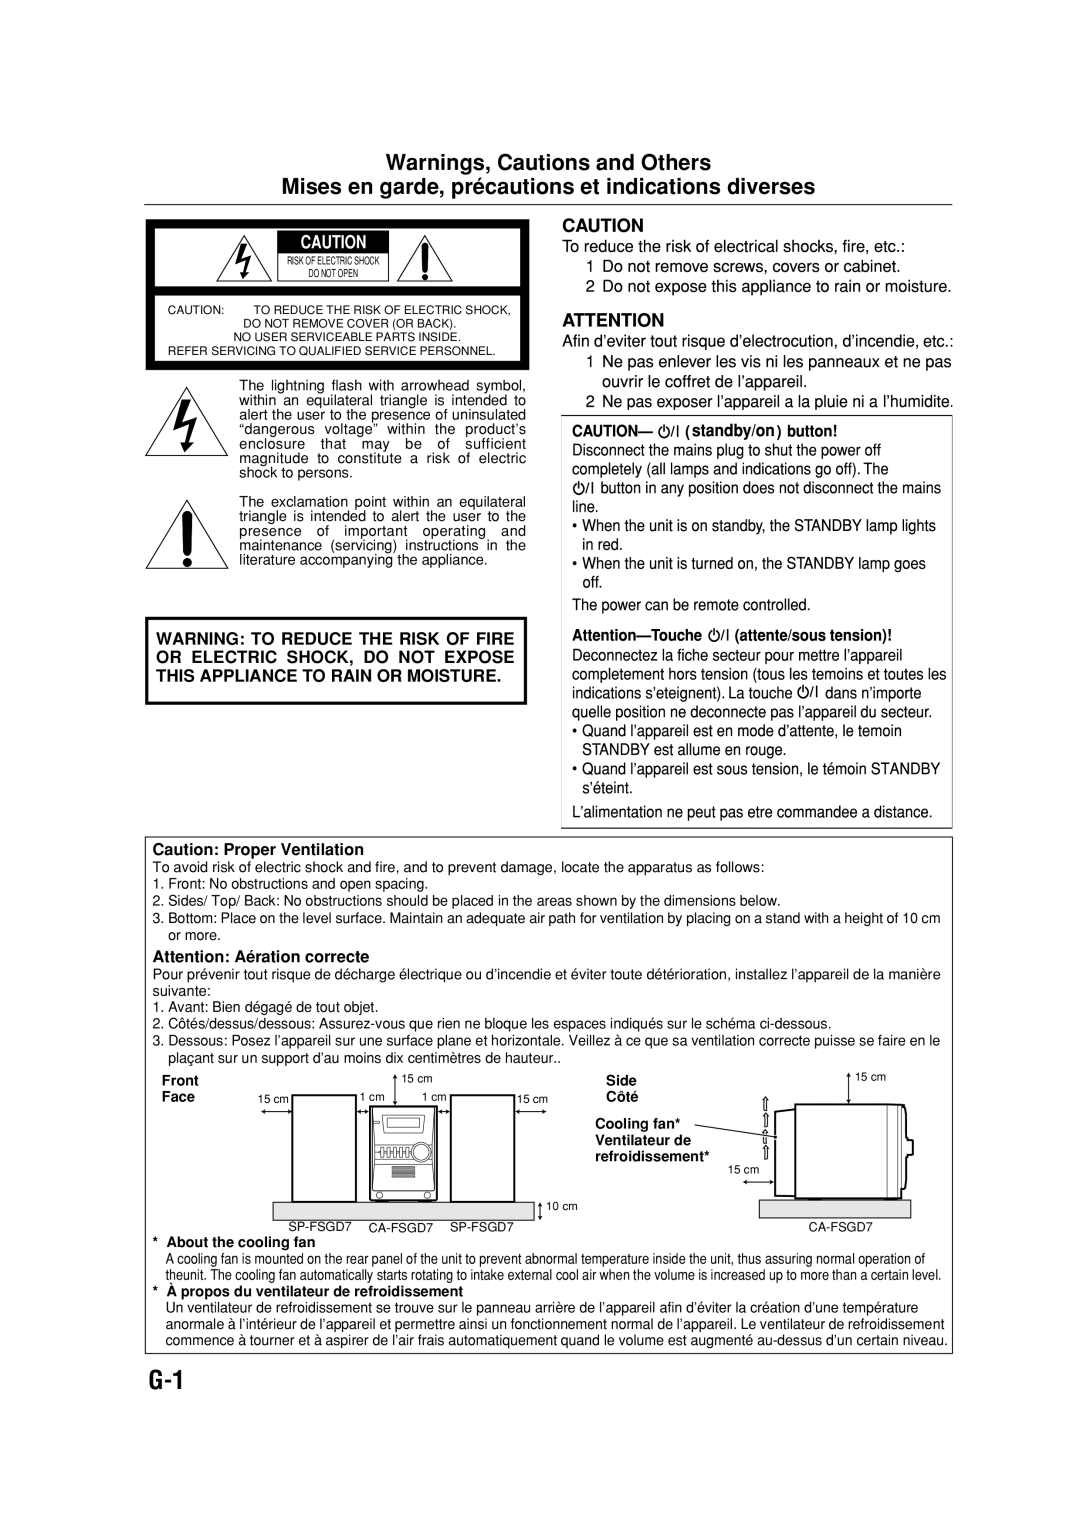 JVC CA-FSGD7 Warnings, Cautions and Others, Warning: To Reduce The Risk Of Fire, Or Electric Shock, Do Not Expose, Front 